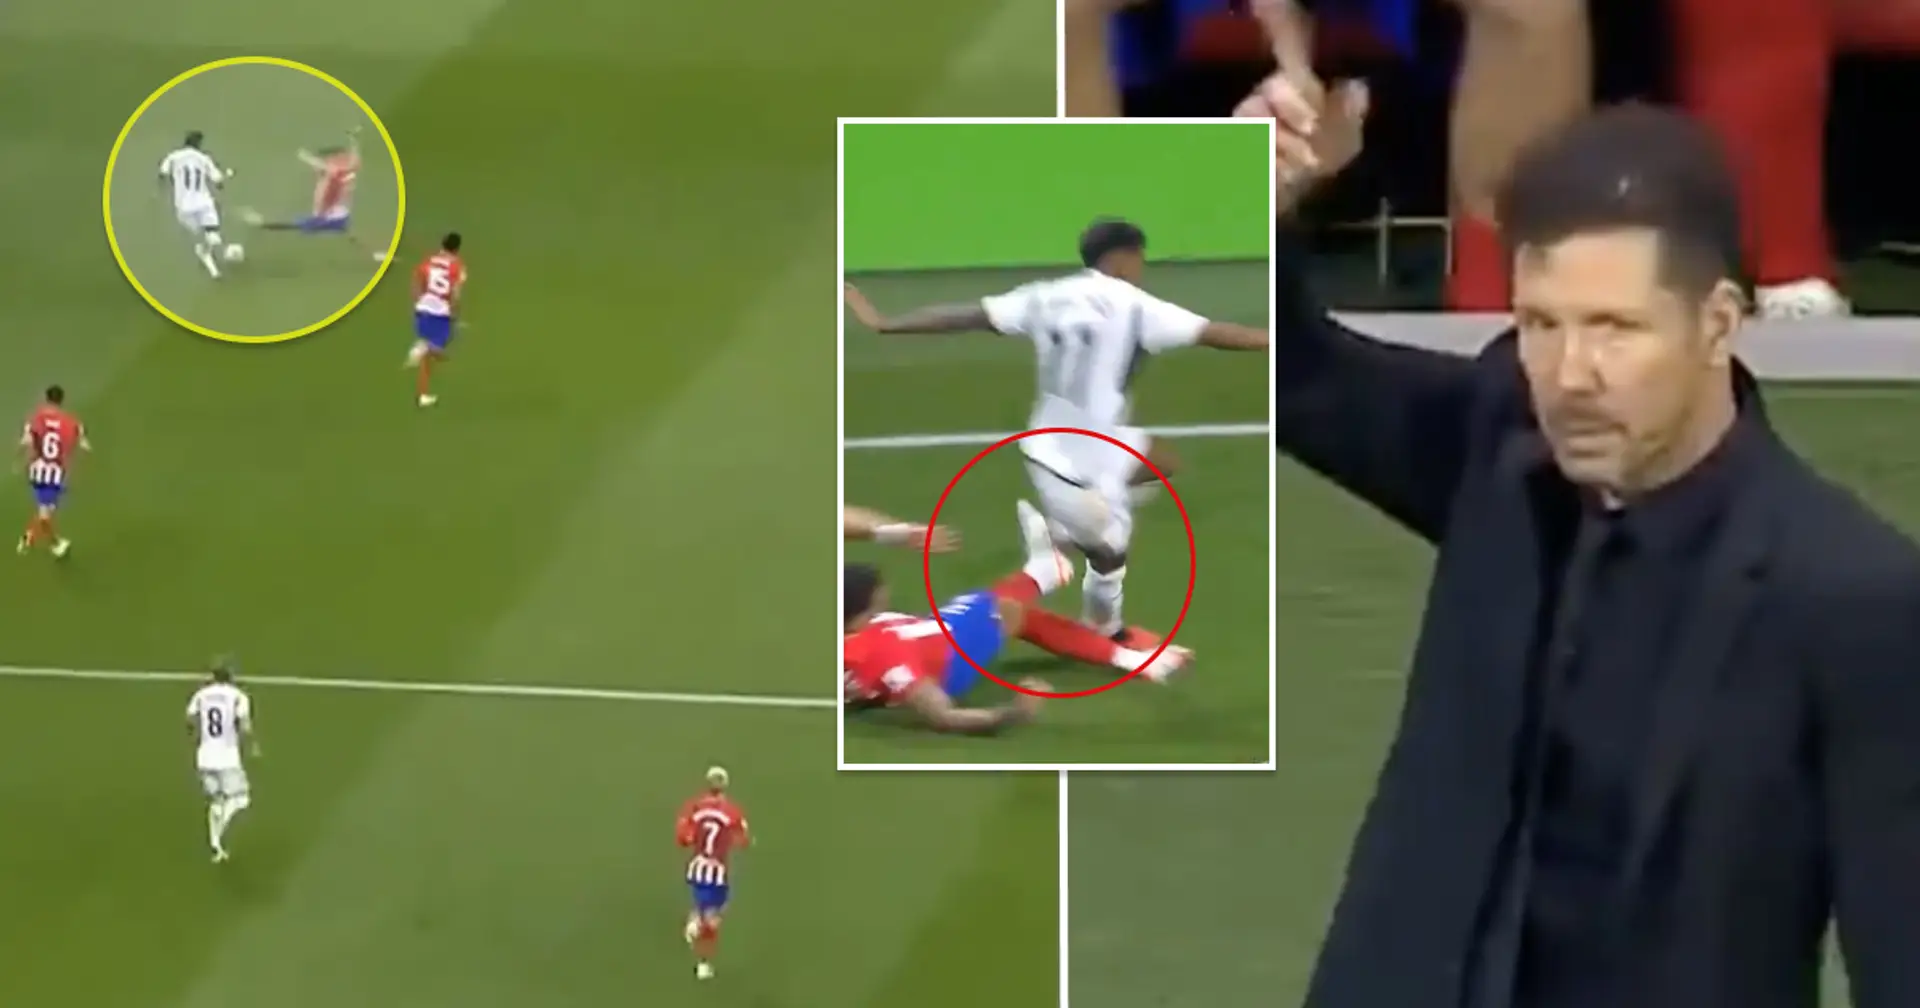 Gimenez's nasty tackle on Rodrygo caught on camera, fans convinced he'd get straight red card if roles were reversed